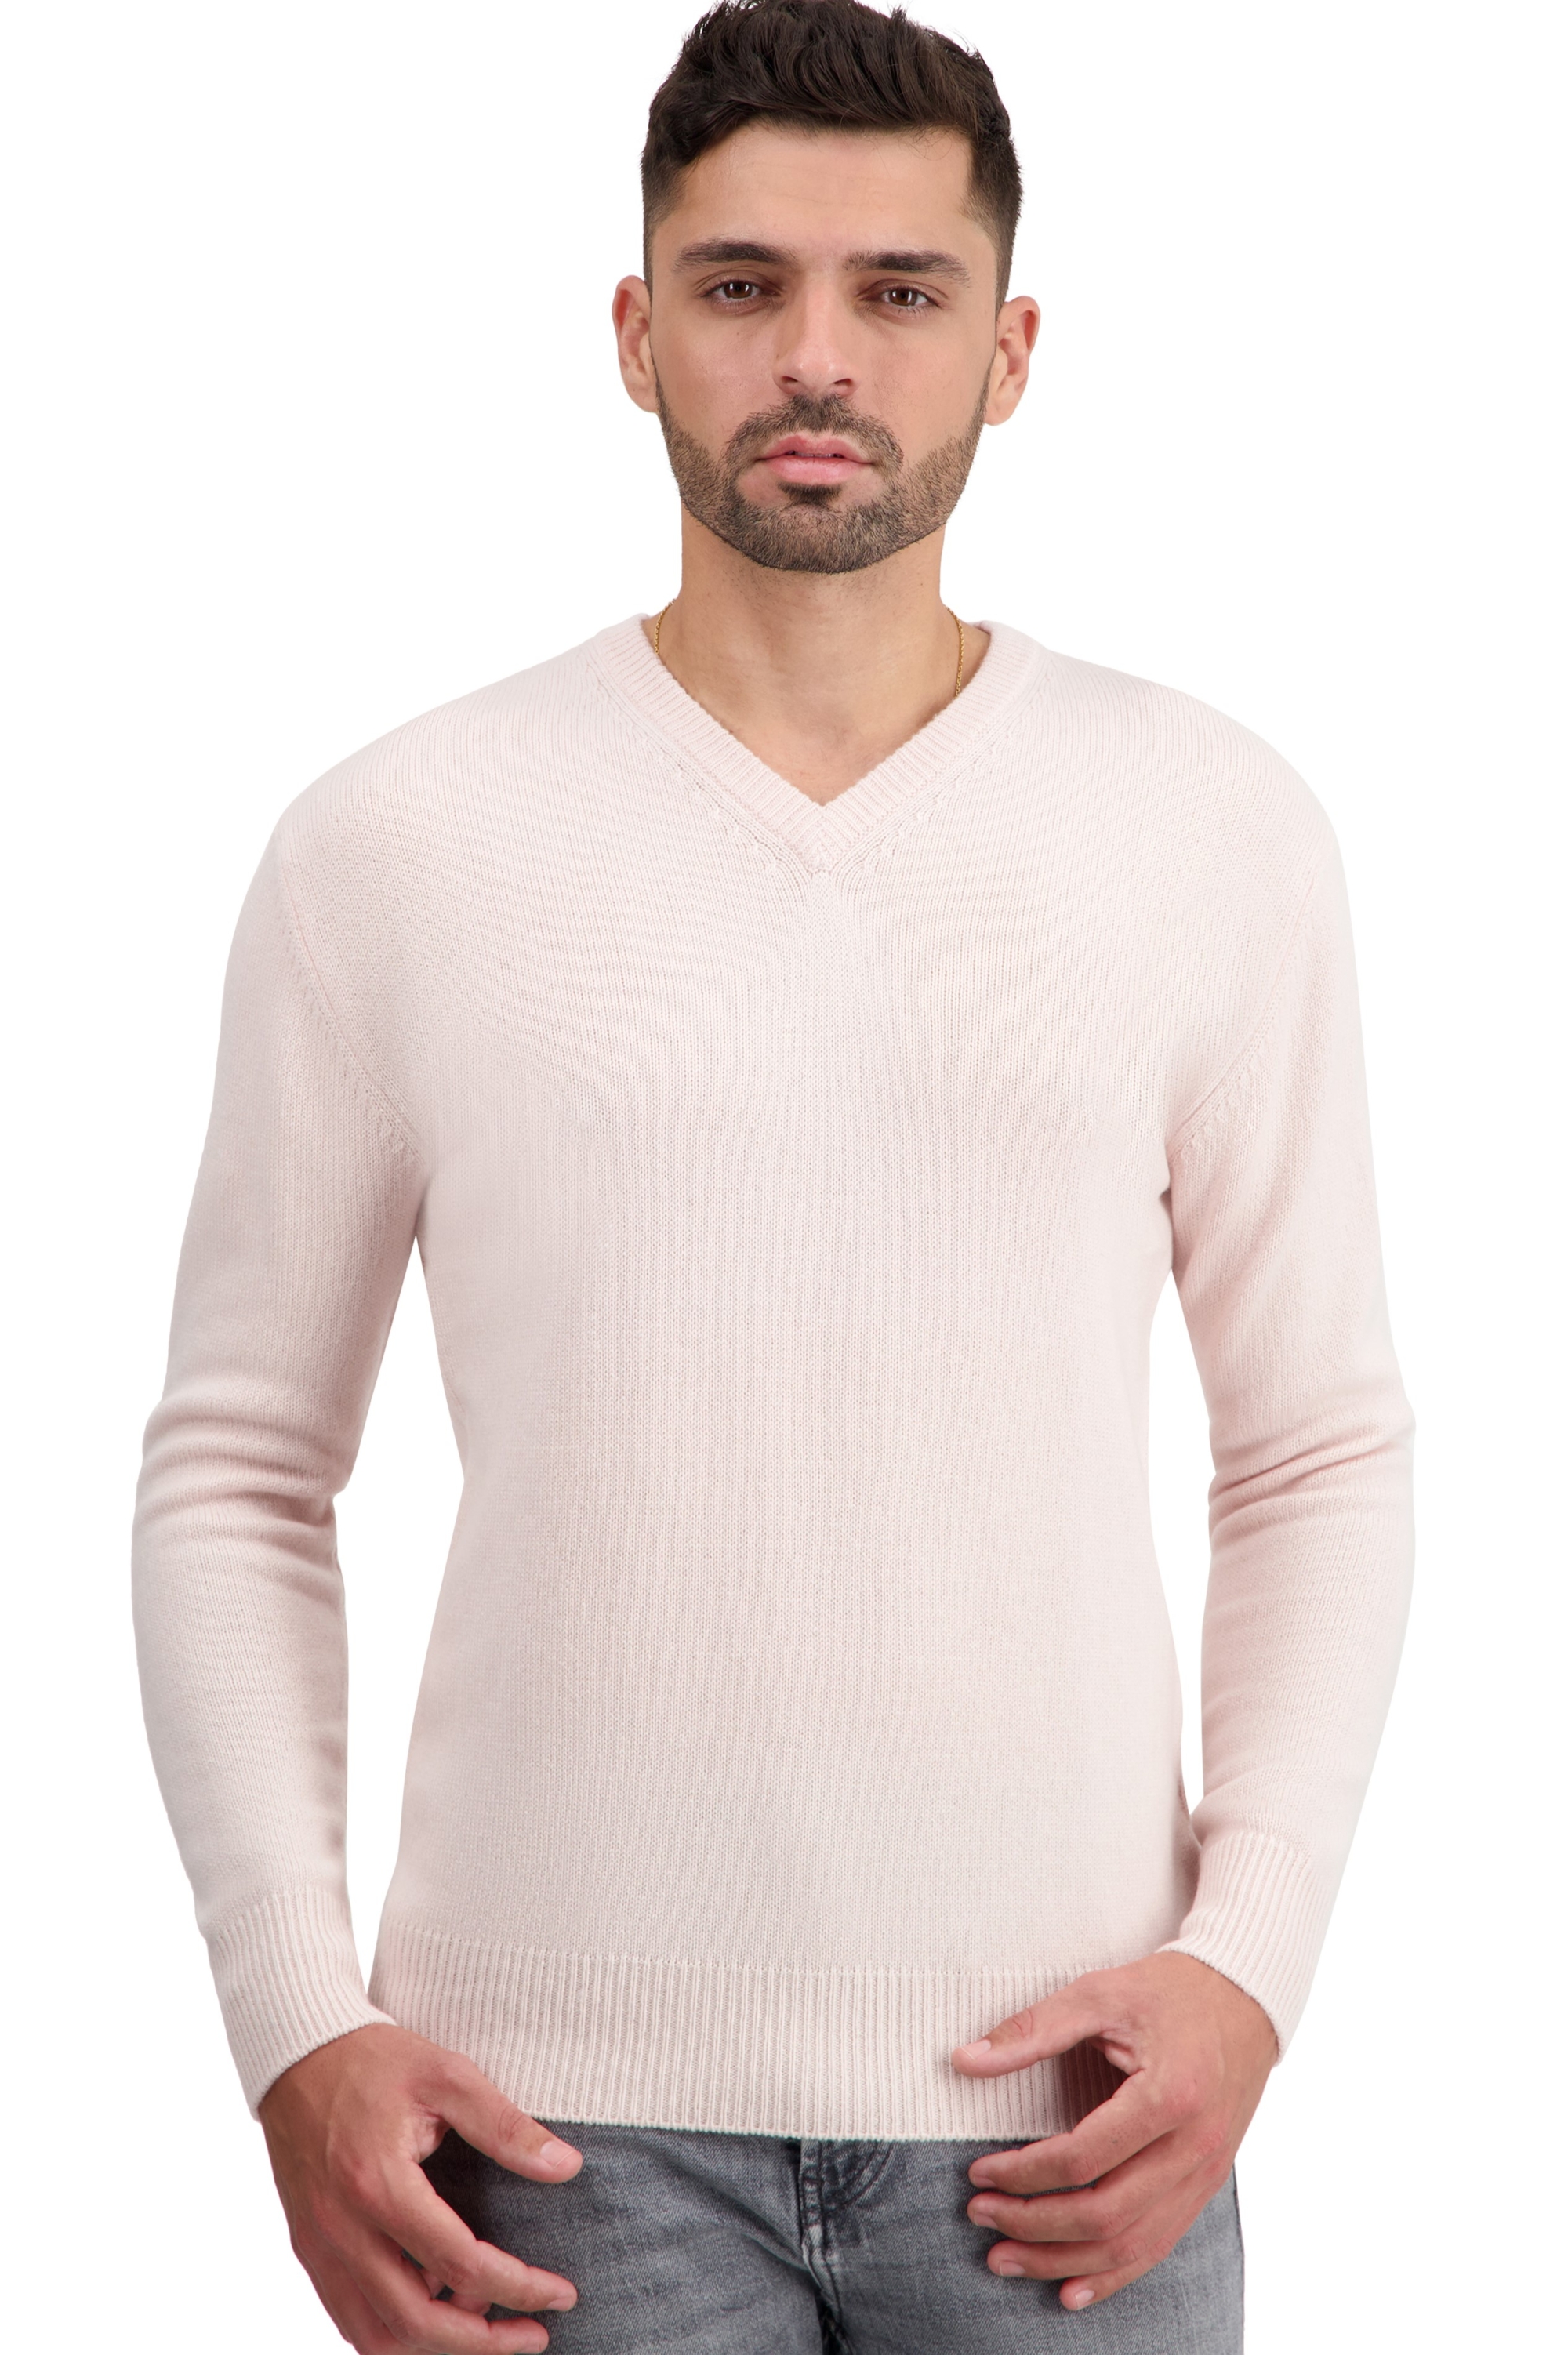 Cachemire pull homme col v tour first mallow m